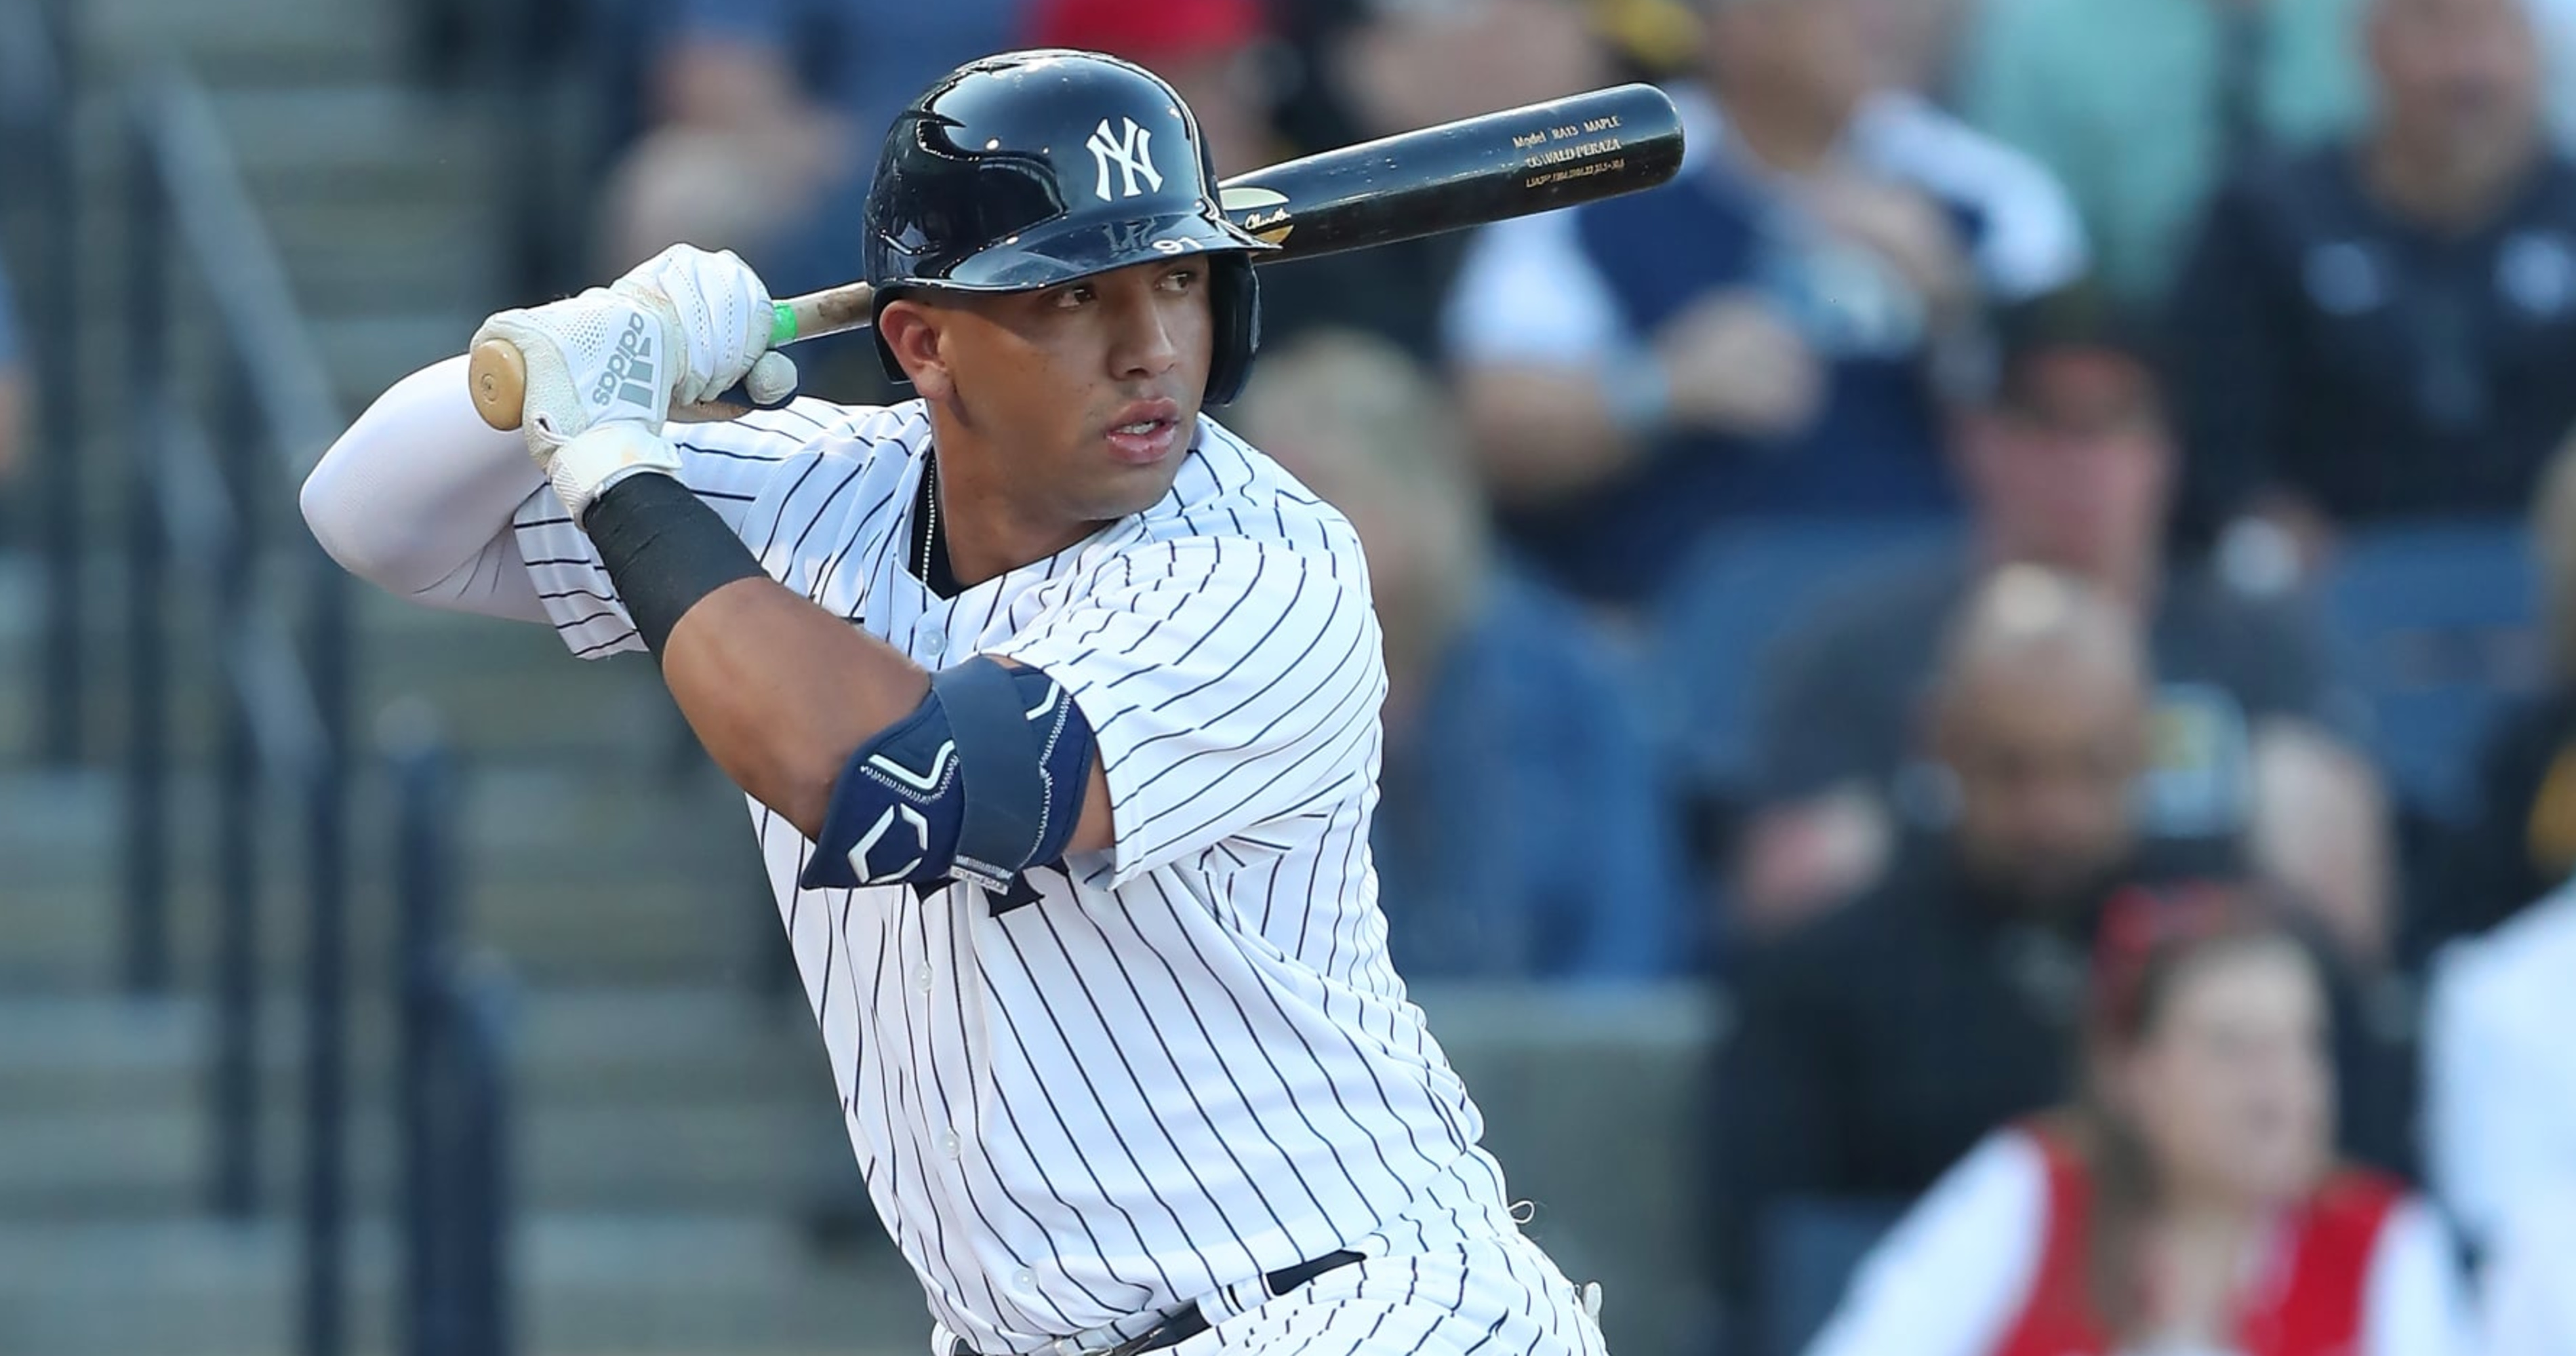 Yankees call up SS prospect Oswald Peraza